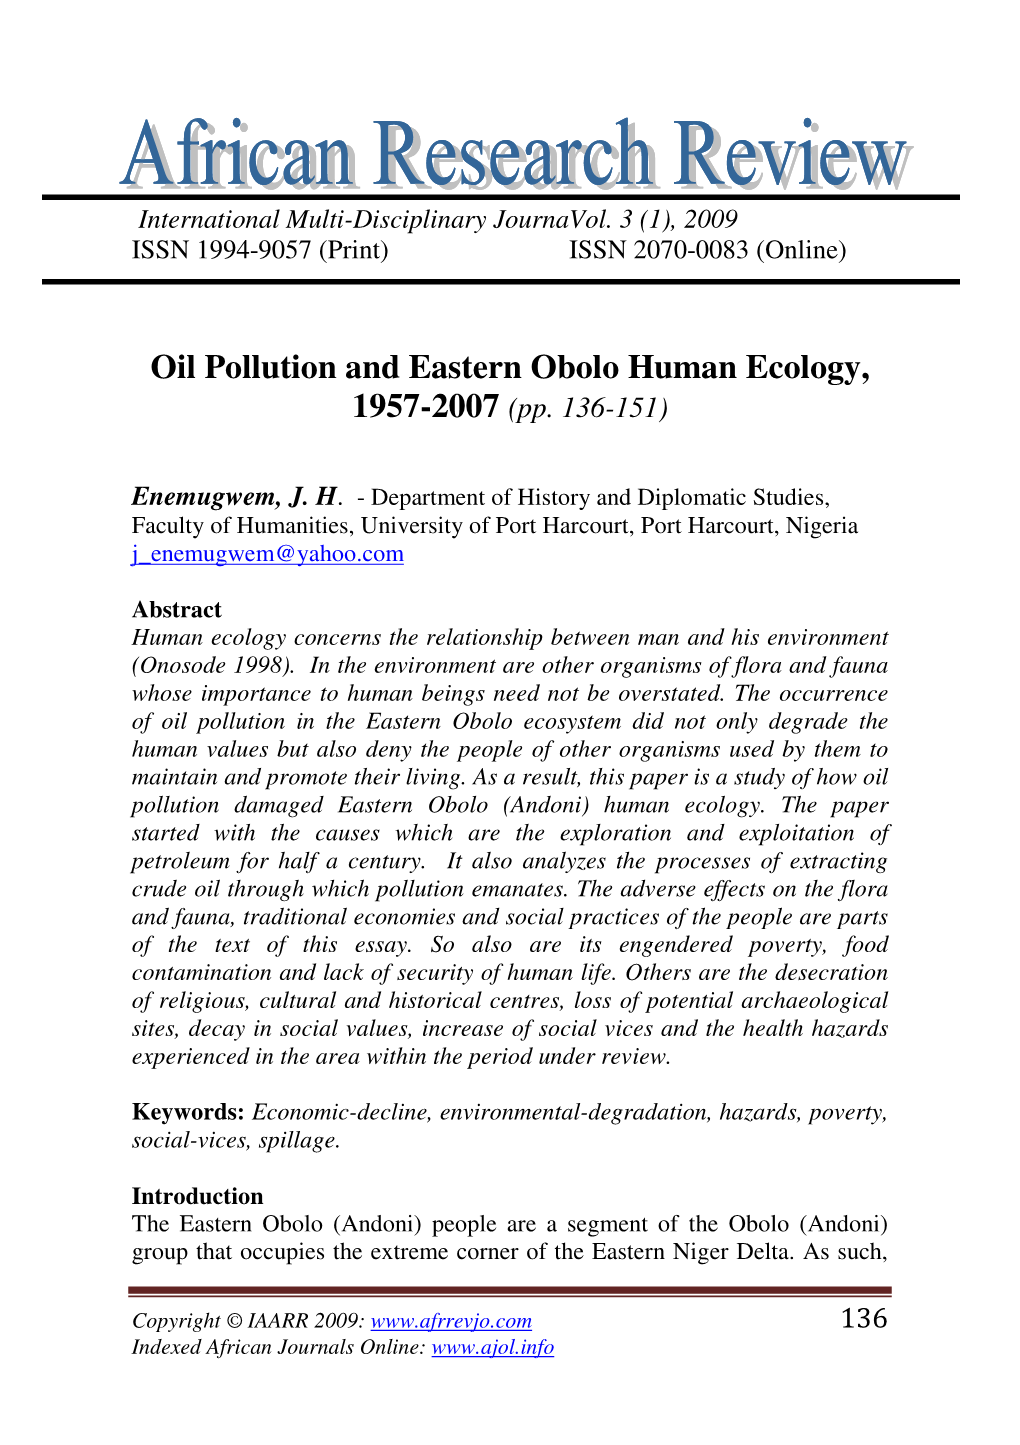 Oil Pollution and Eastern Obolo Human Ecology, 1957-2007 (Pp